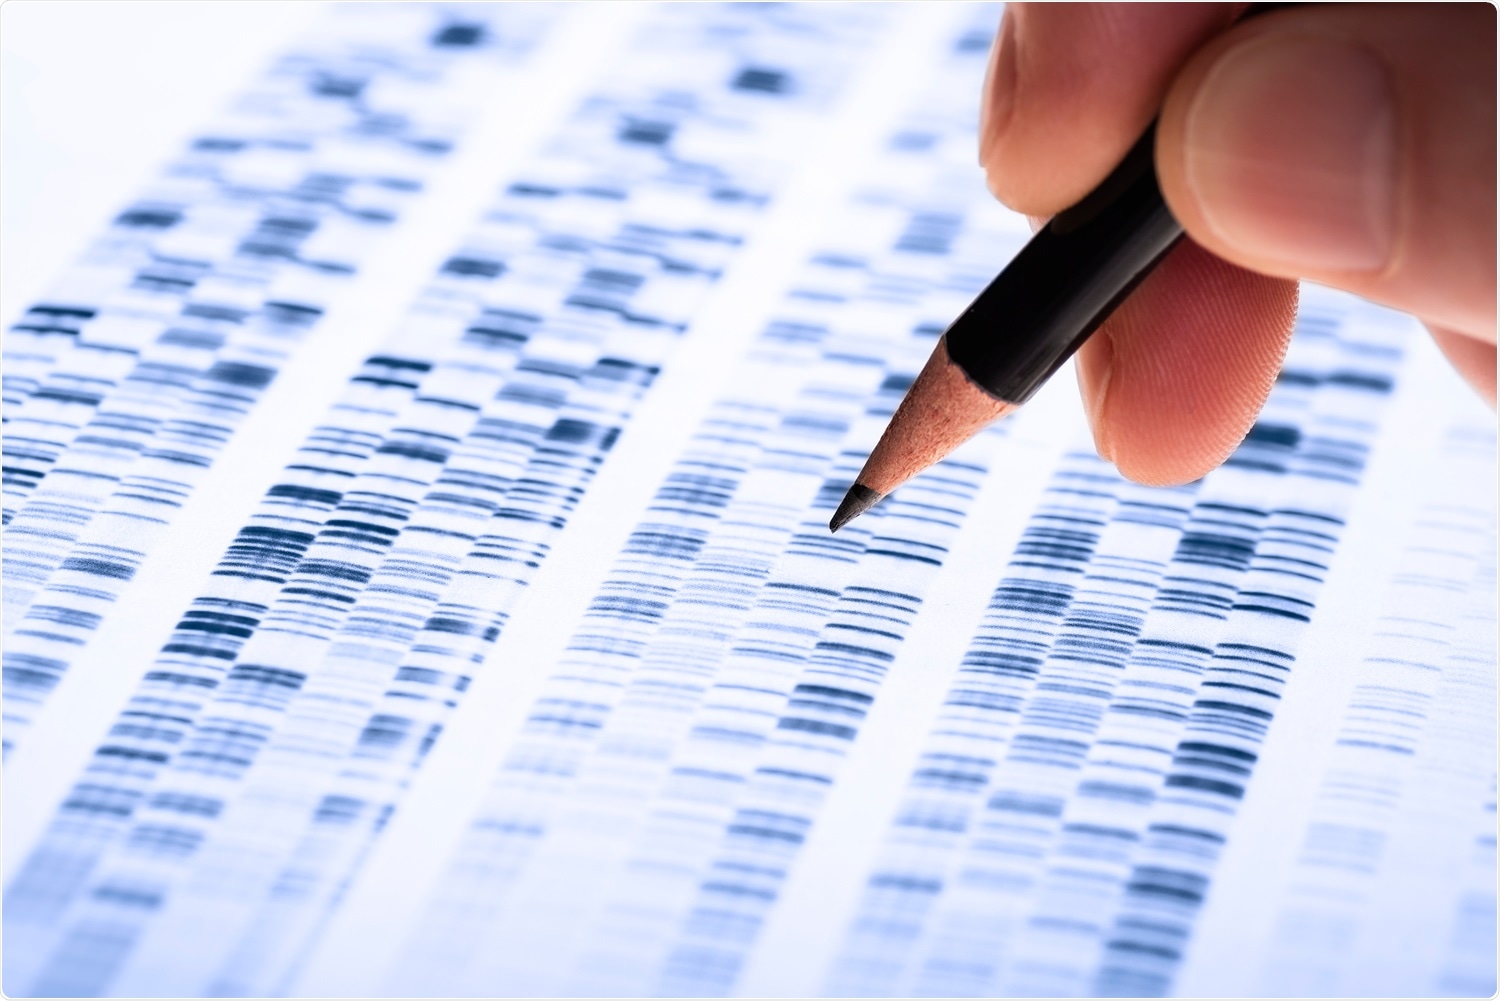 Study: A combination of variant genotypes at two loci in the APOL1 gene is associated with adverse outcomes in SARS-CoV-2: a UK Biobank study. Image Credit: Gopixa / Shutterstock